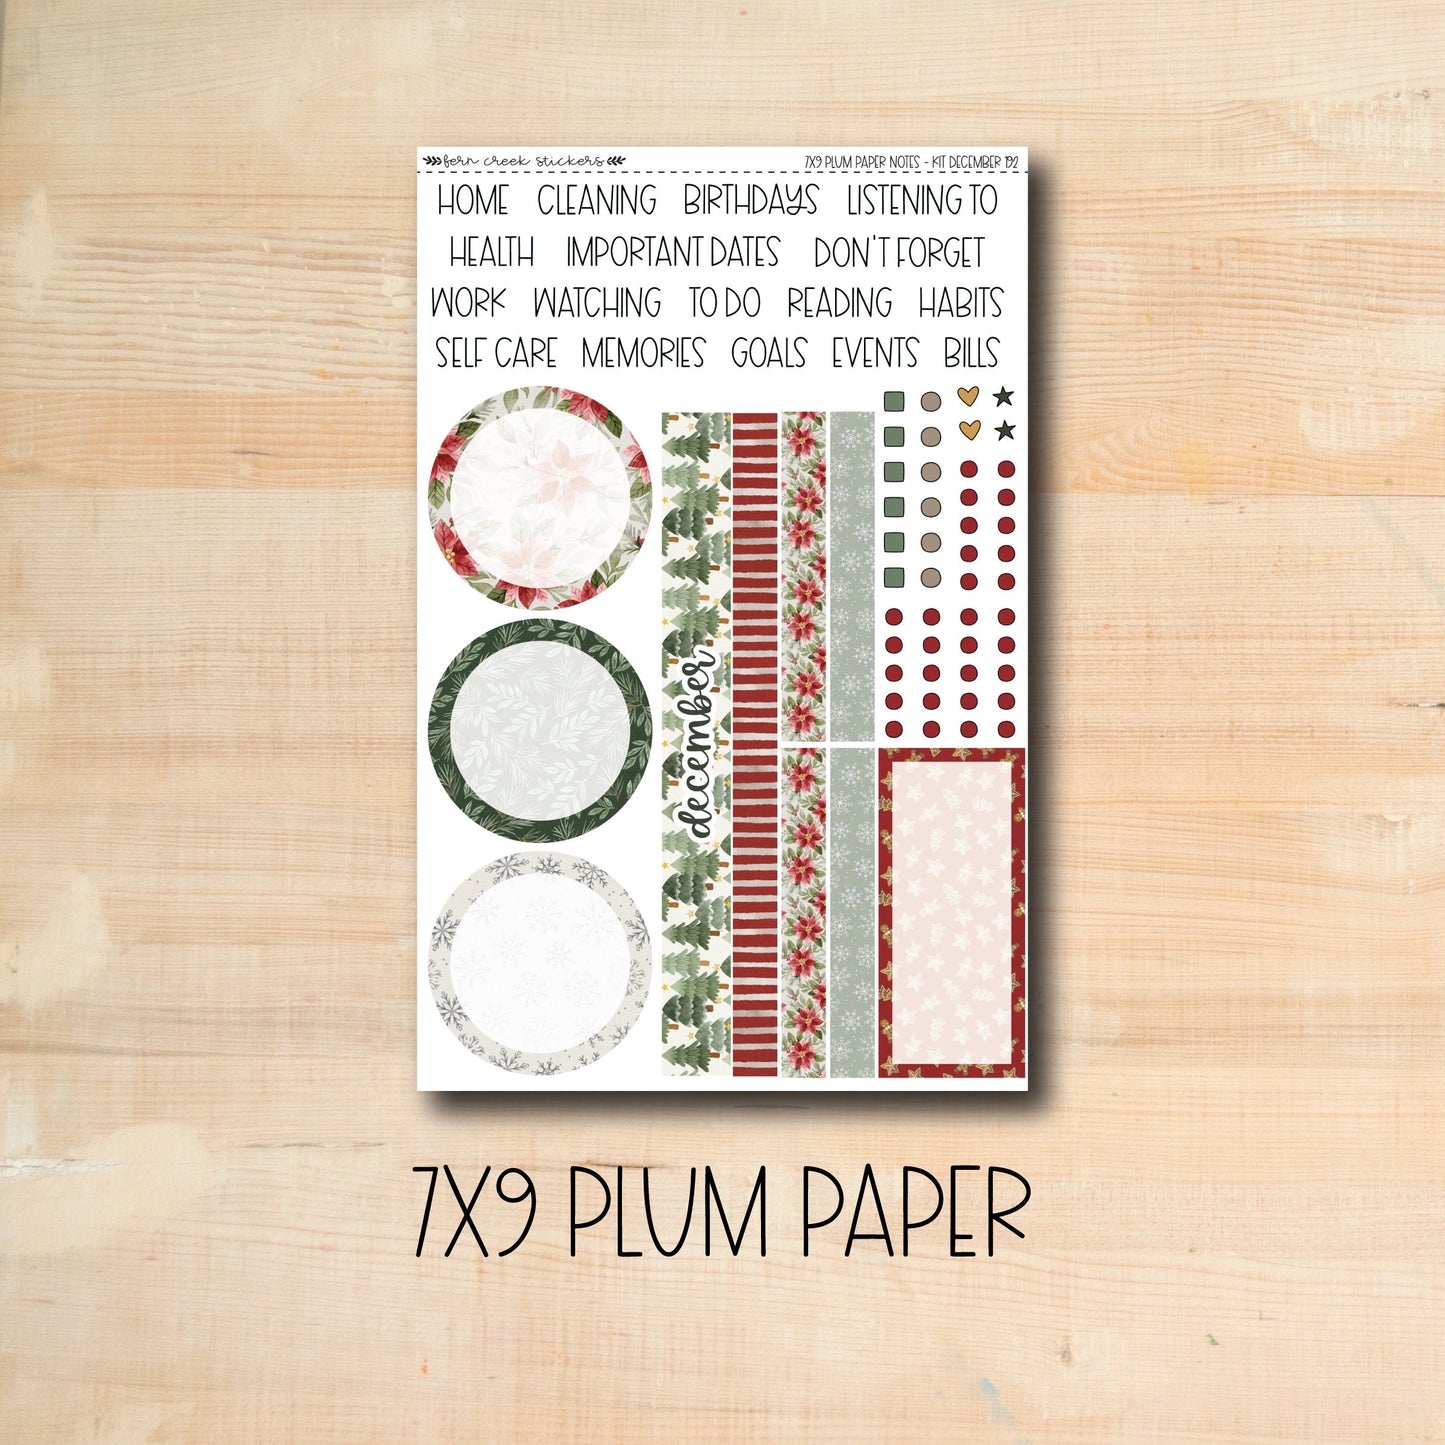 7x9 Plum NOTES-192 || CHRISTMAS CHEER 7x9 Plum Paper December notes page